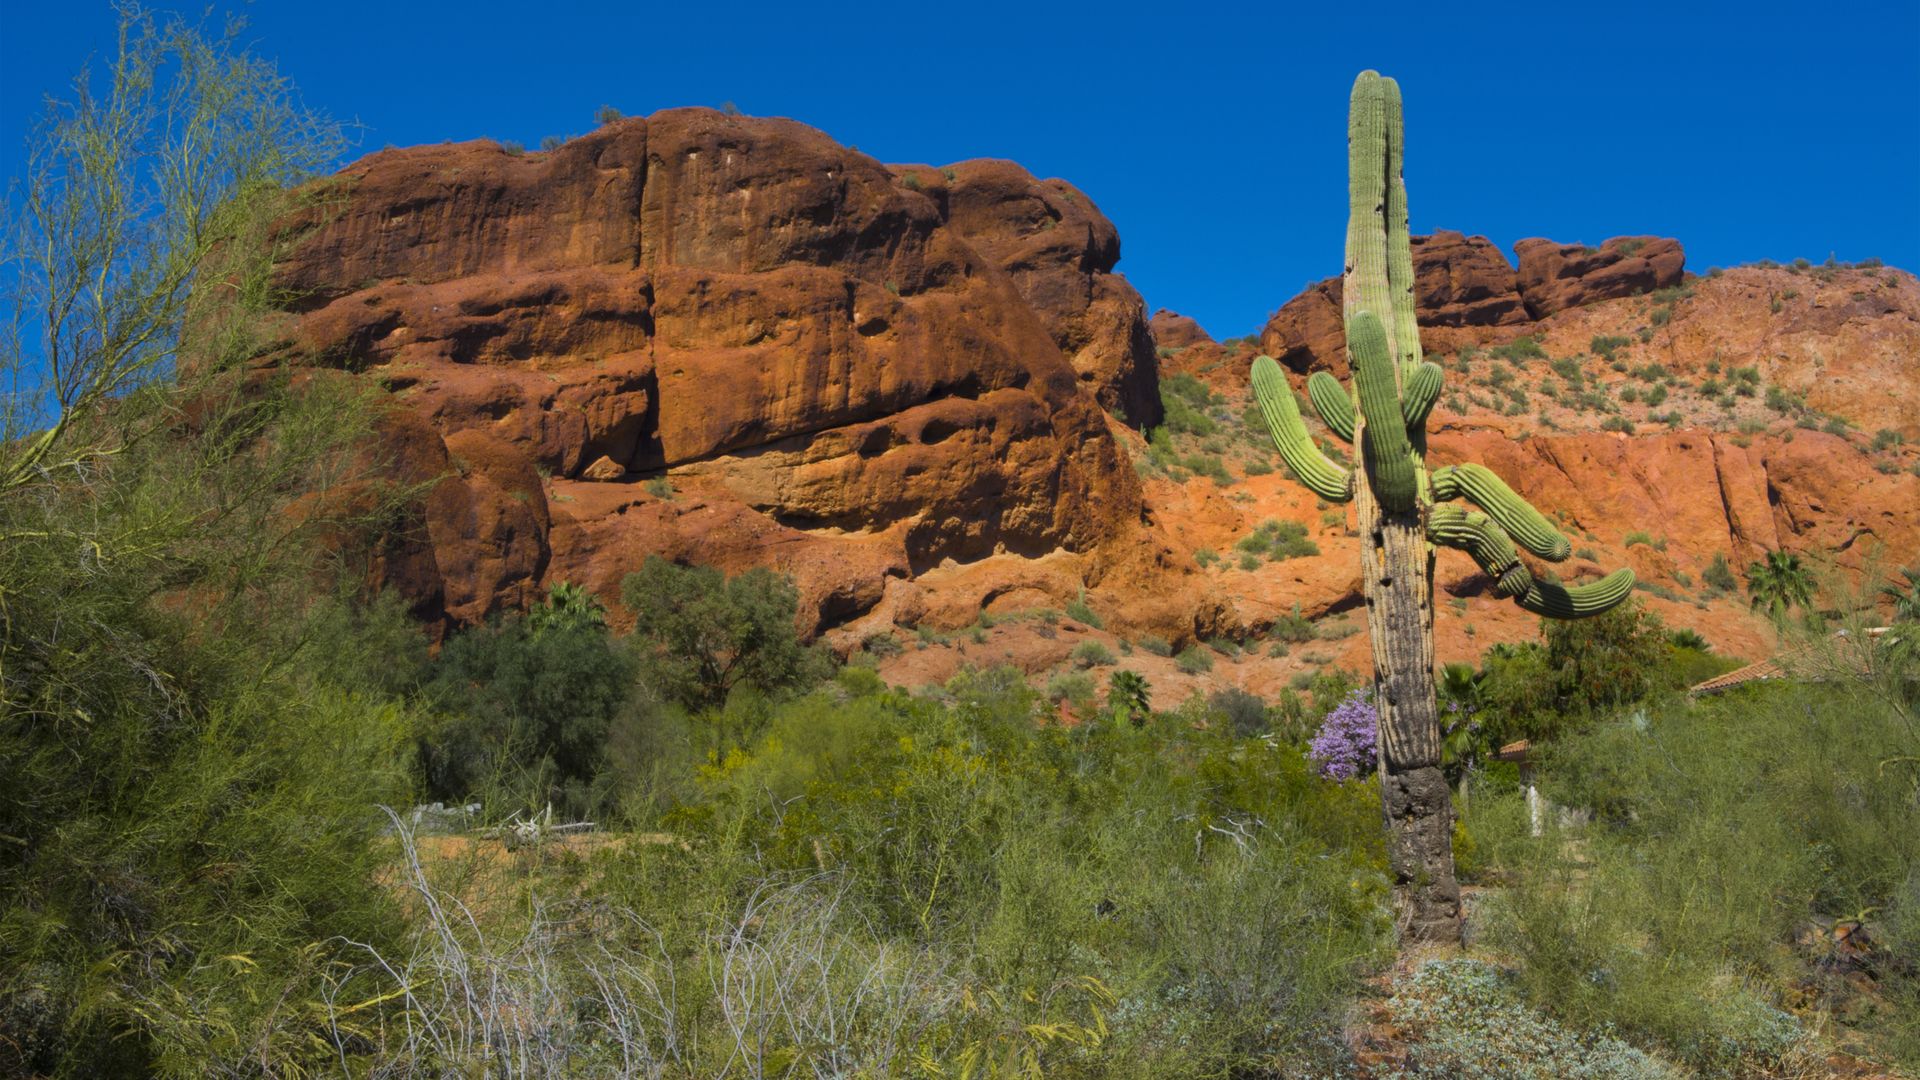 A saguaro cactus and shrubs in front of an orange-colored mountain.